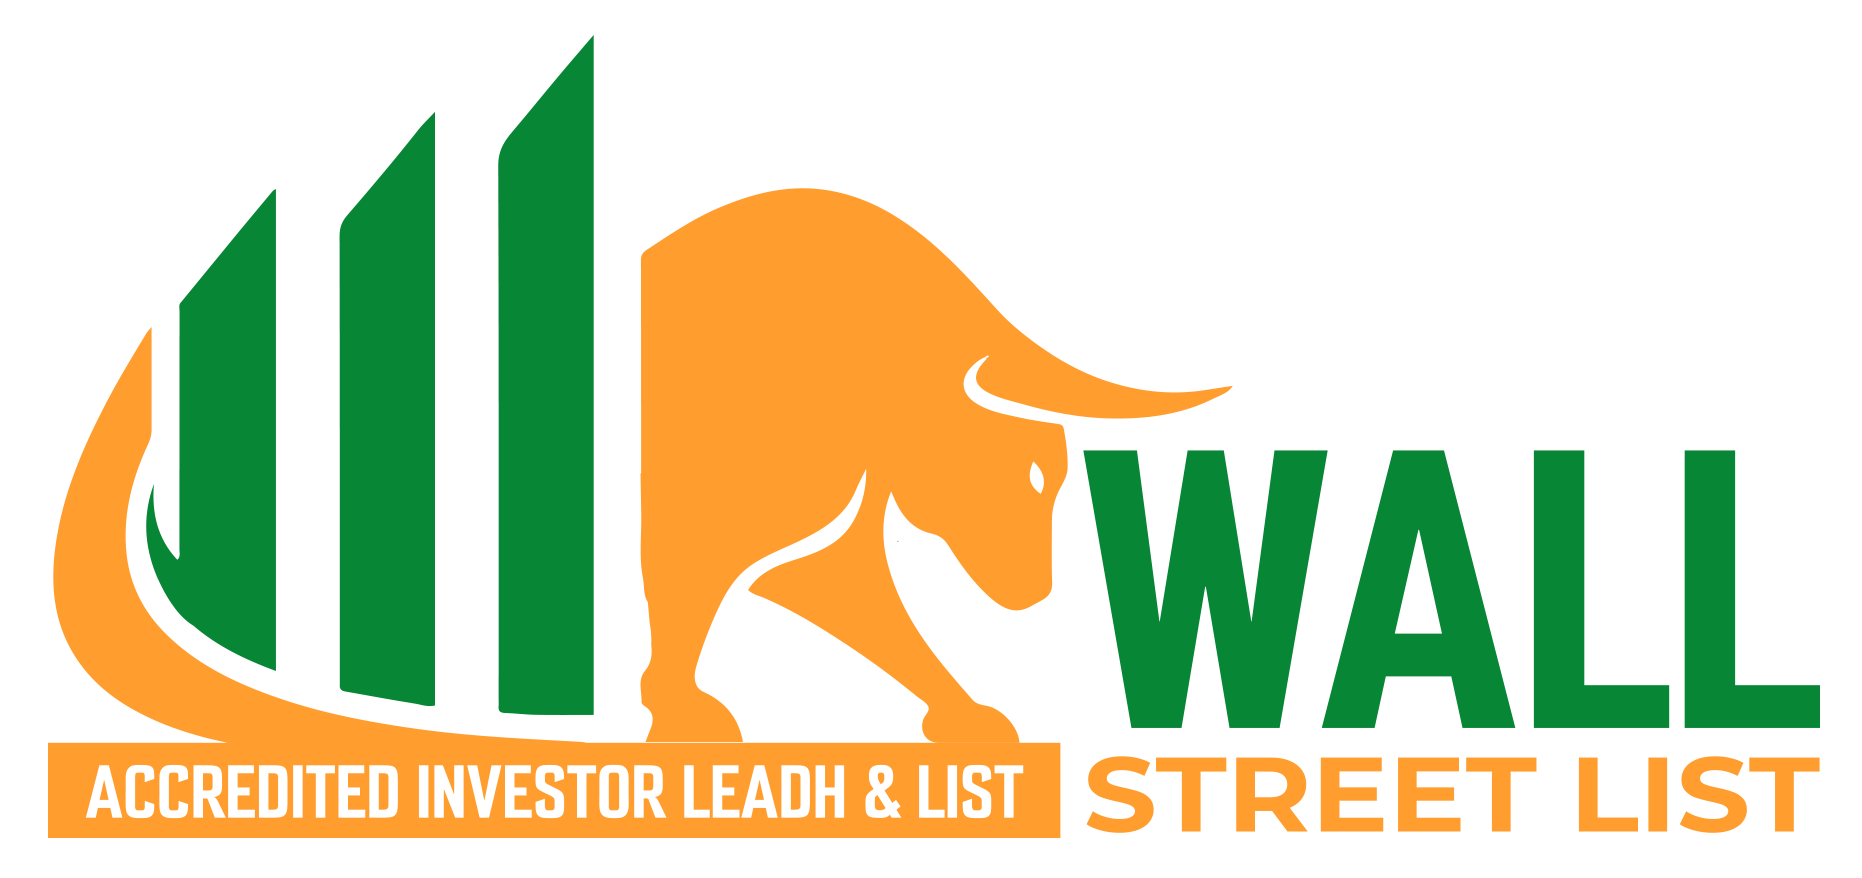 401k Investors Mailing List - Accredited Investor Leads